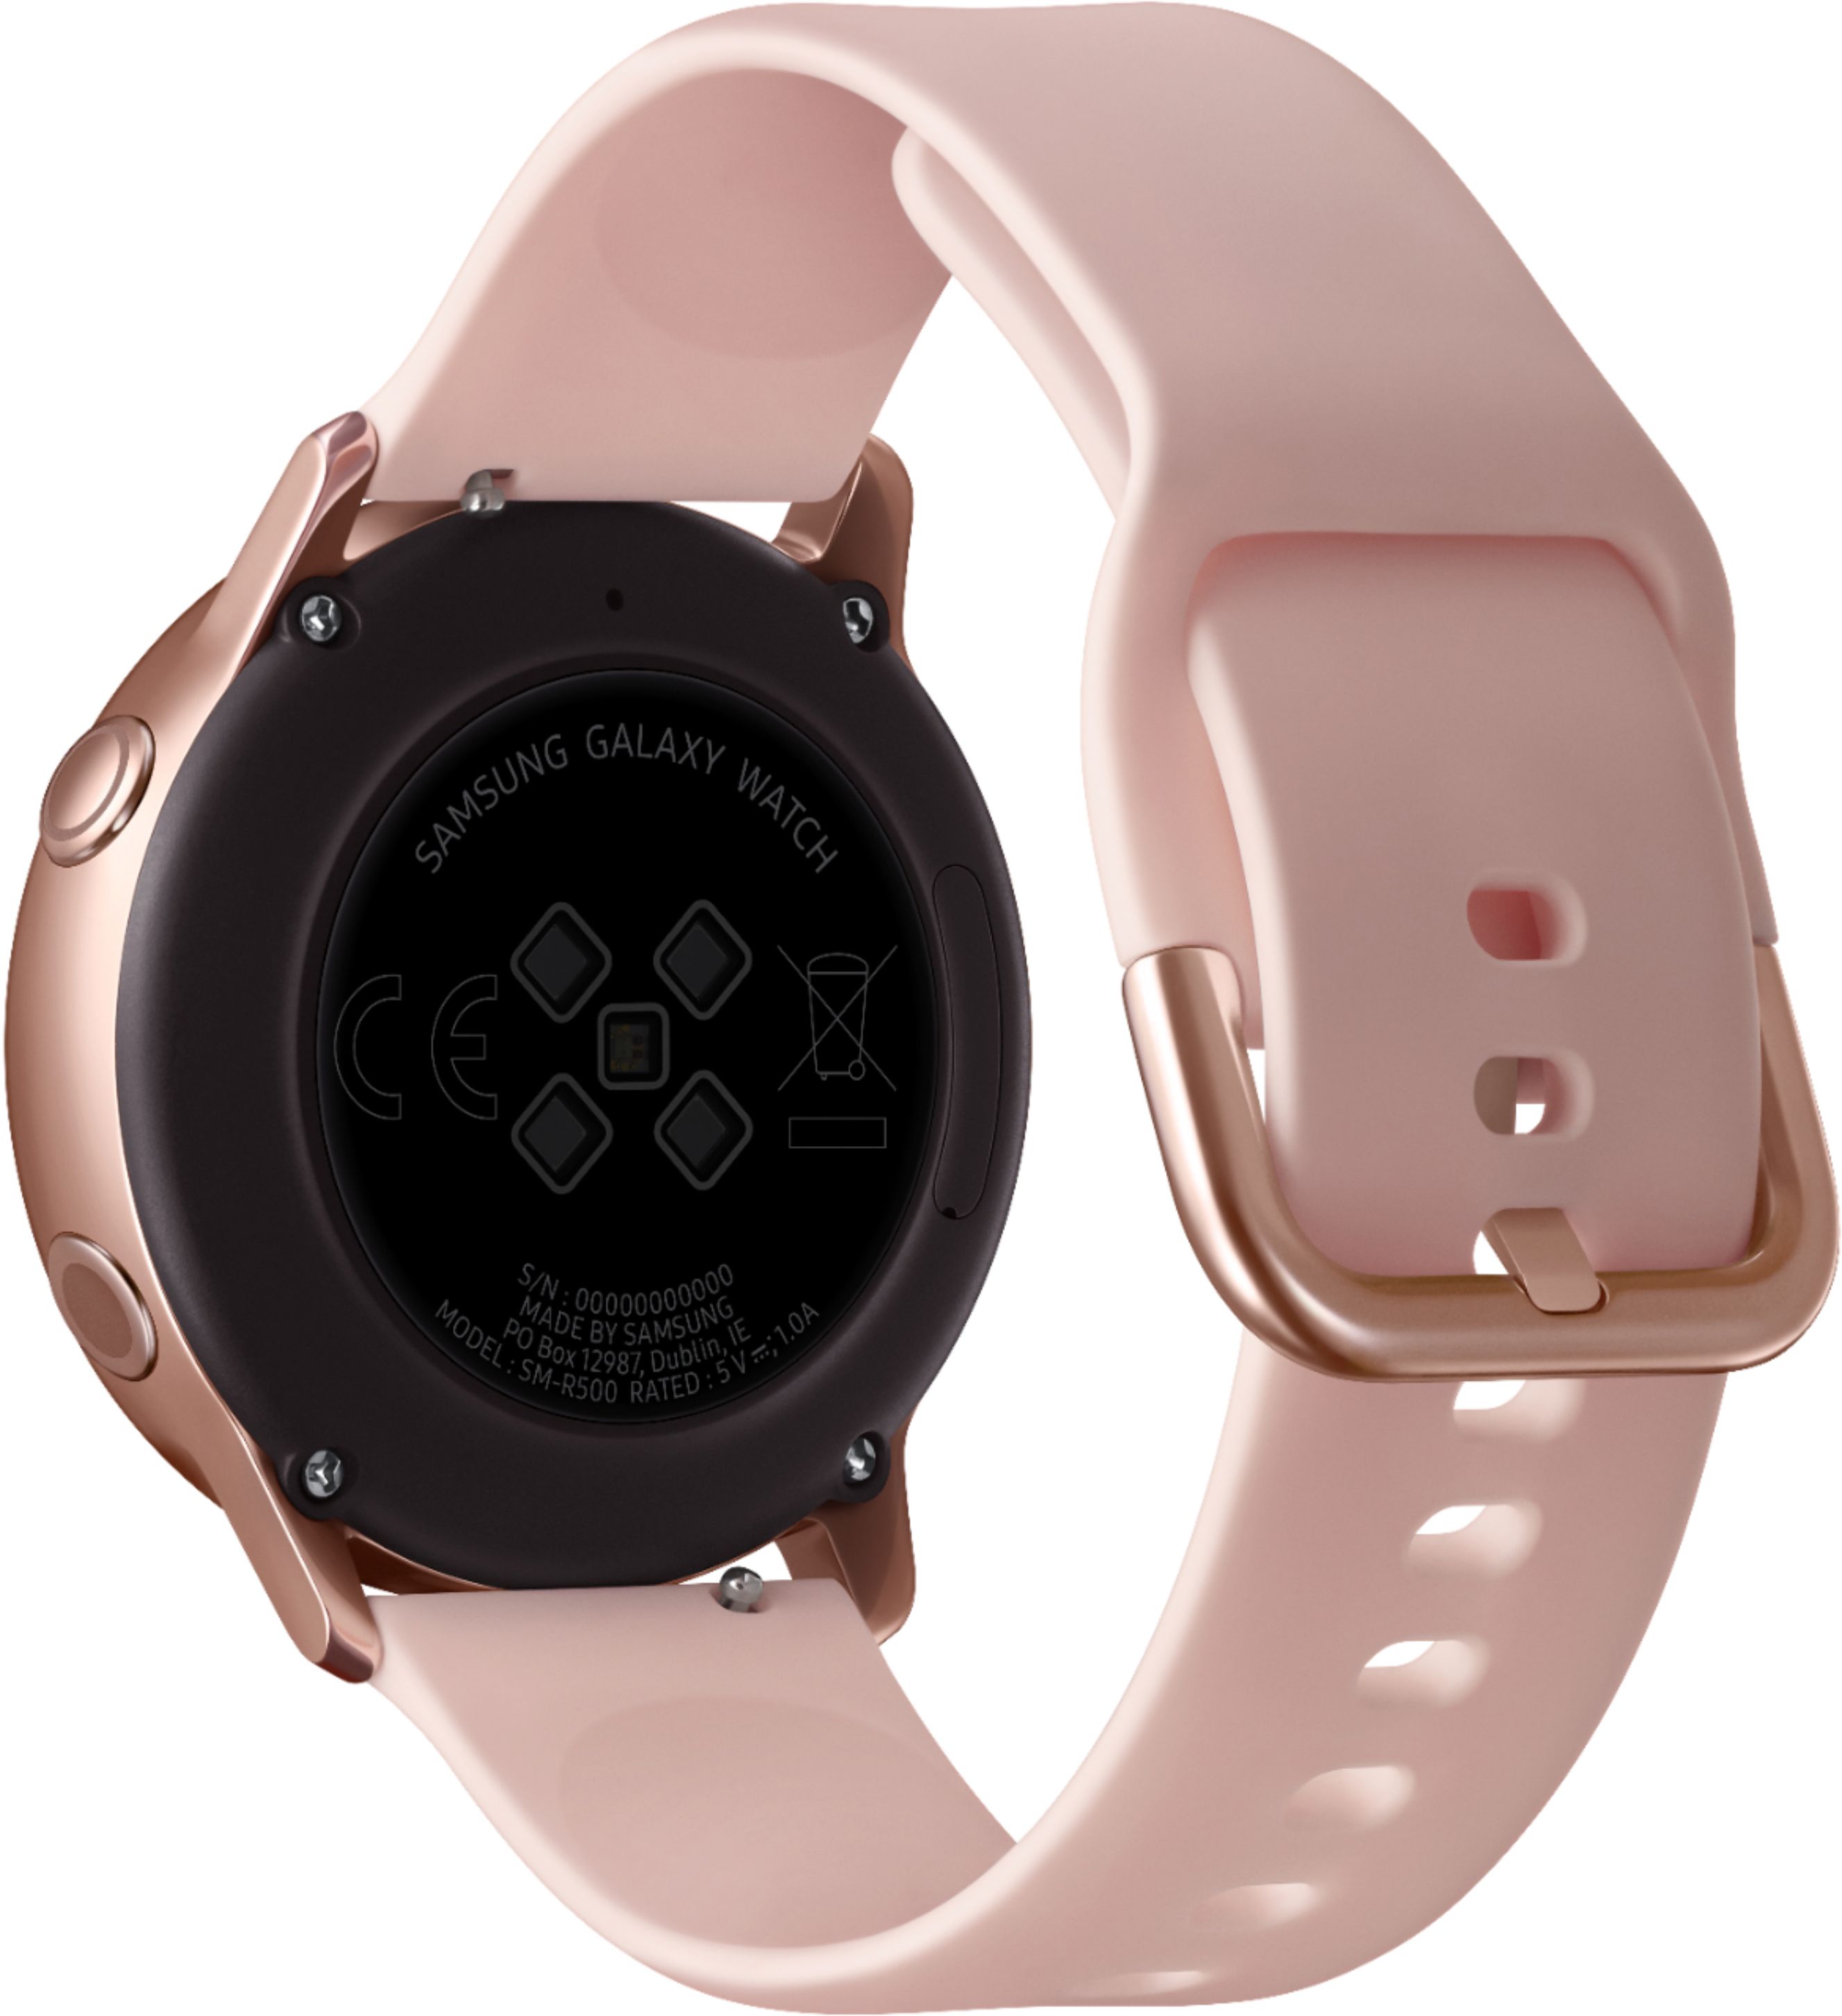 Galaxy Watch Active Wear 05F3, Rose Gold blue tooth,40mm, smartwatch